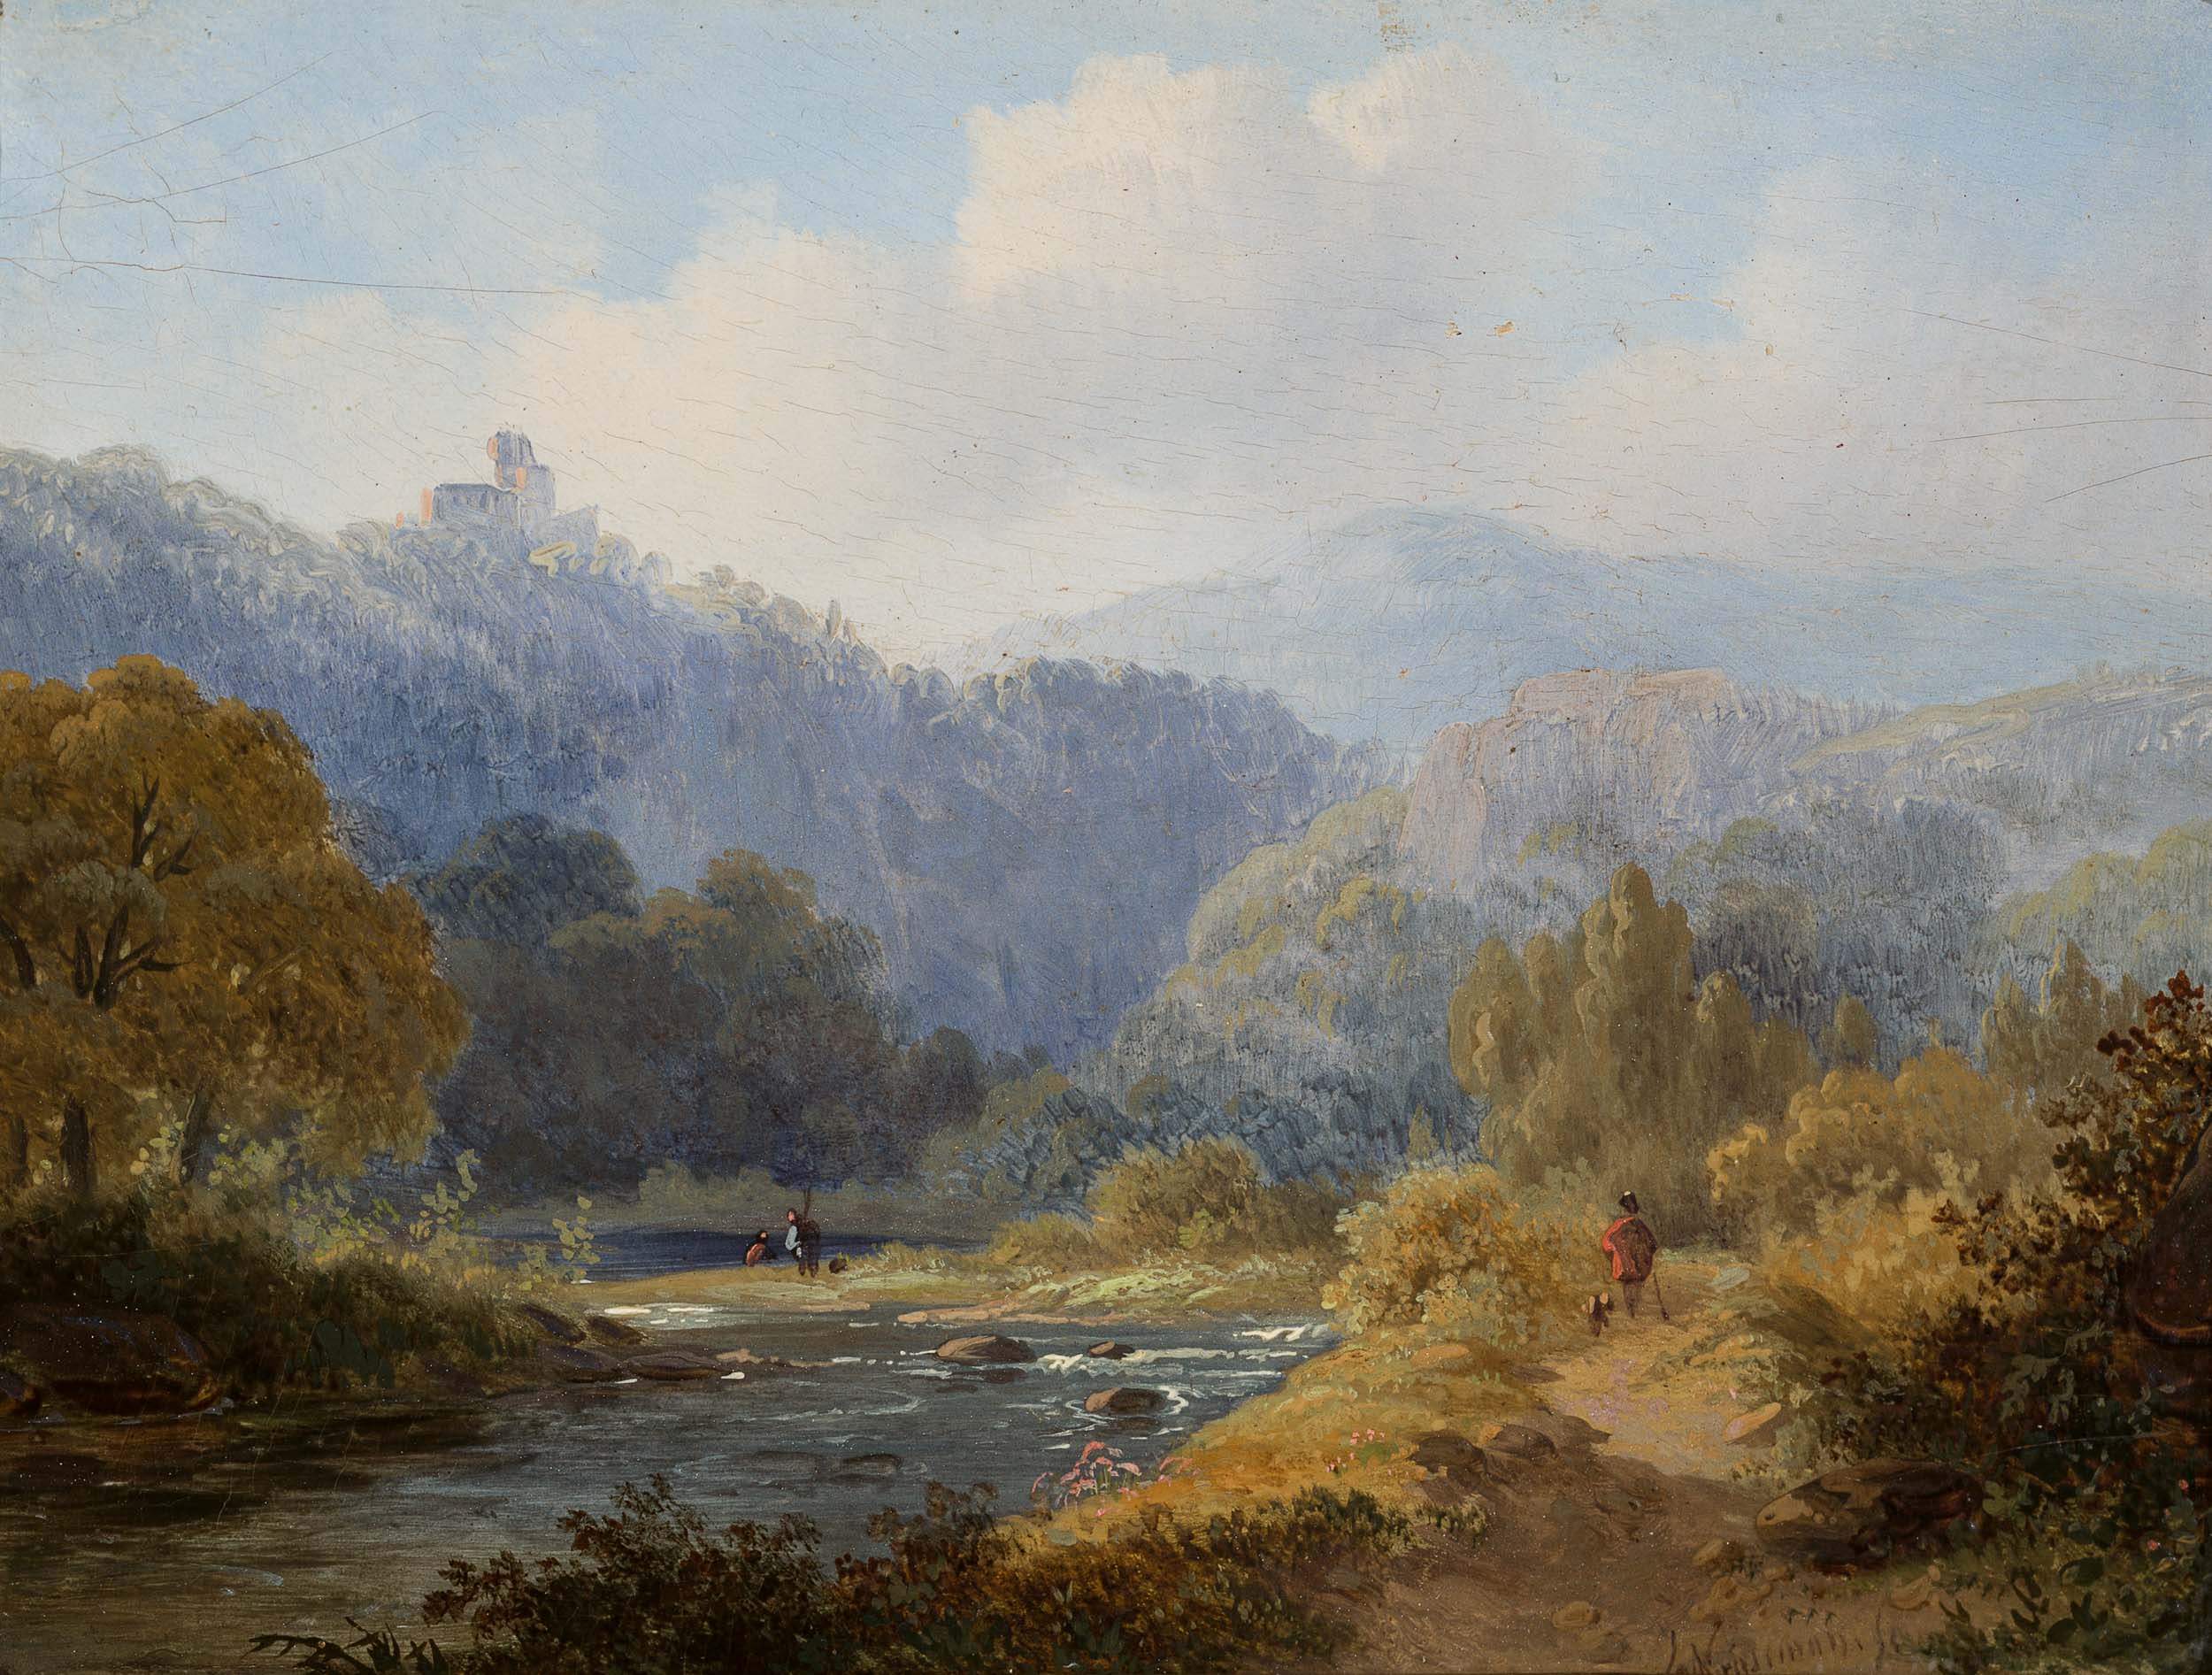 A Traveller and Anglers in a Mountainous Sunlit River Landscape